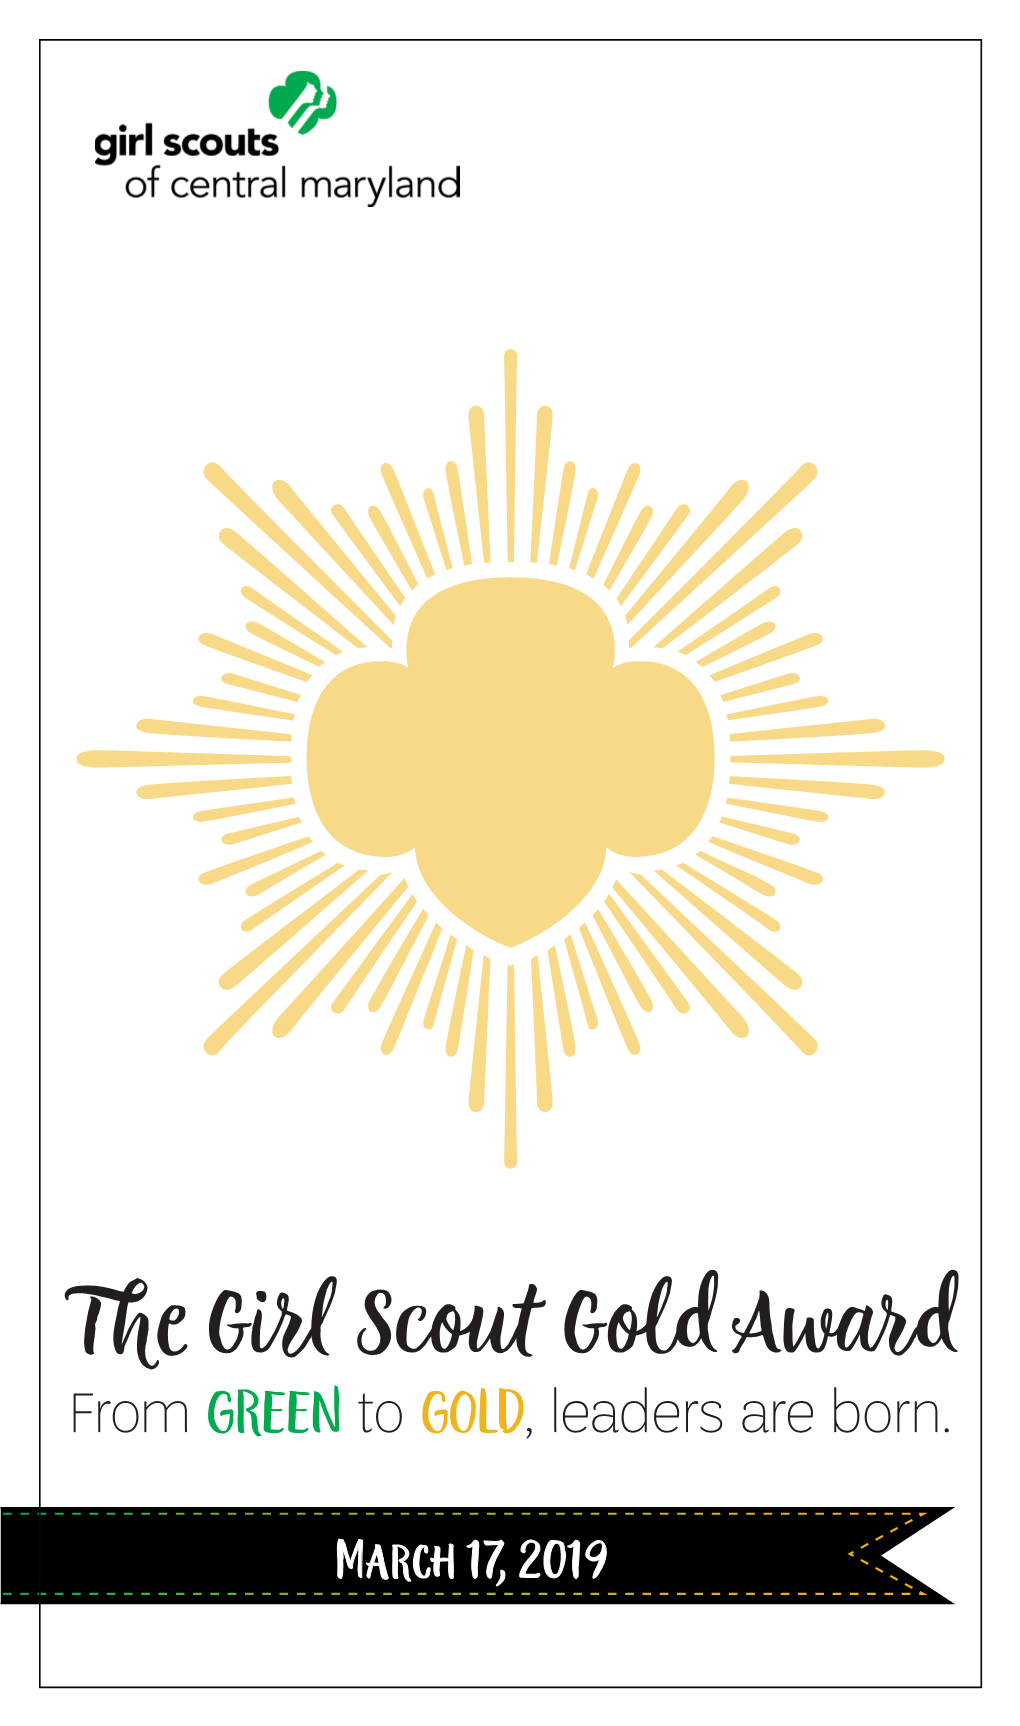 The Girl Scout Gold Award from Green to Gold, Leaders Are Born